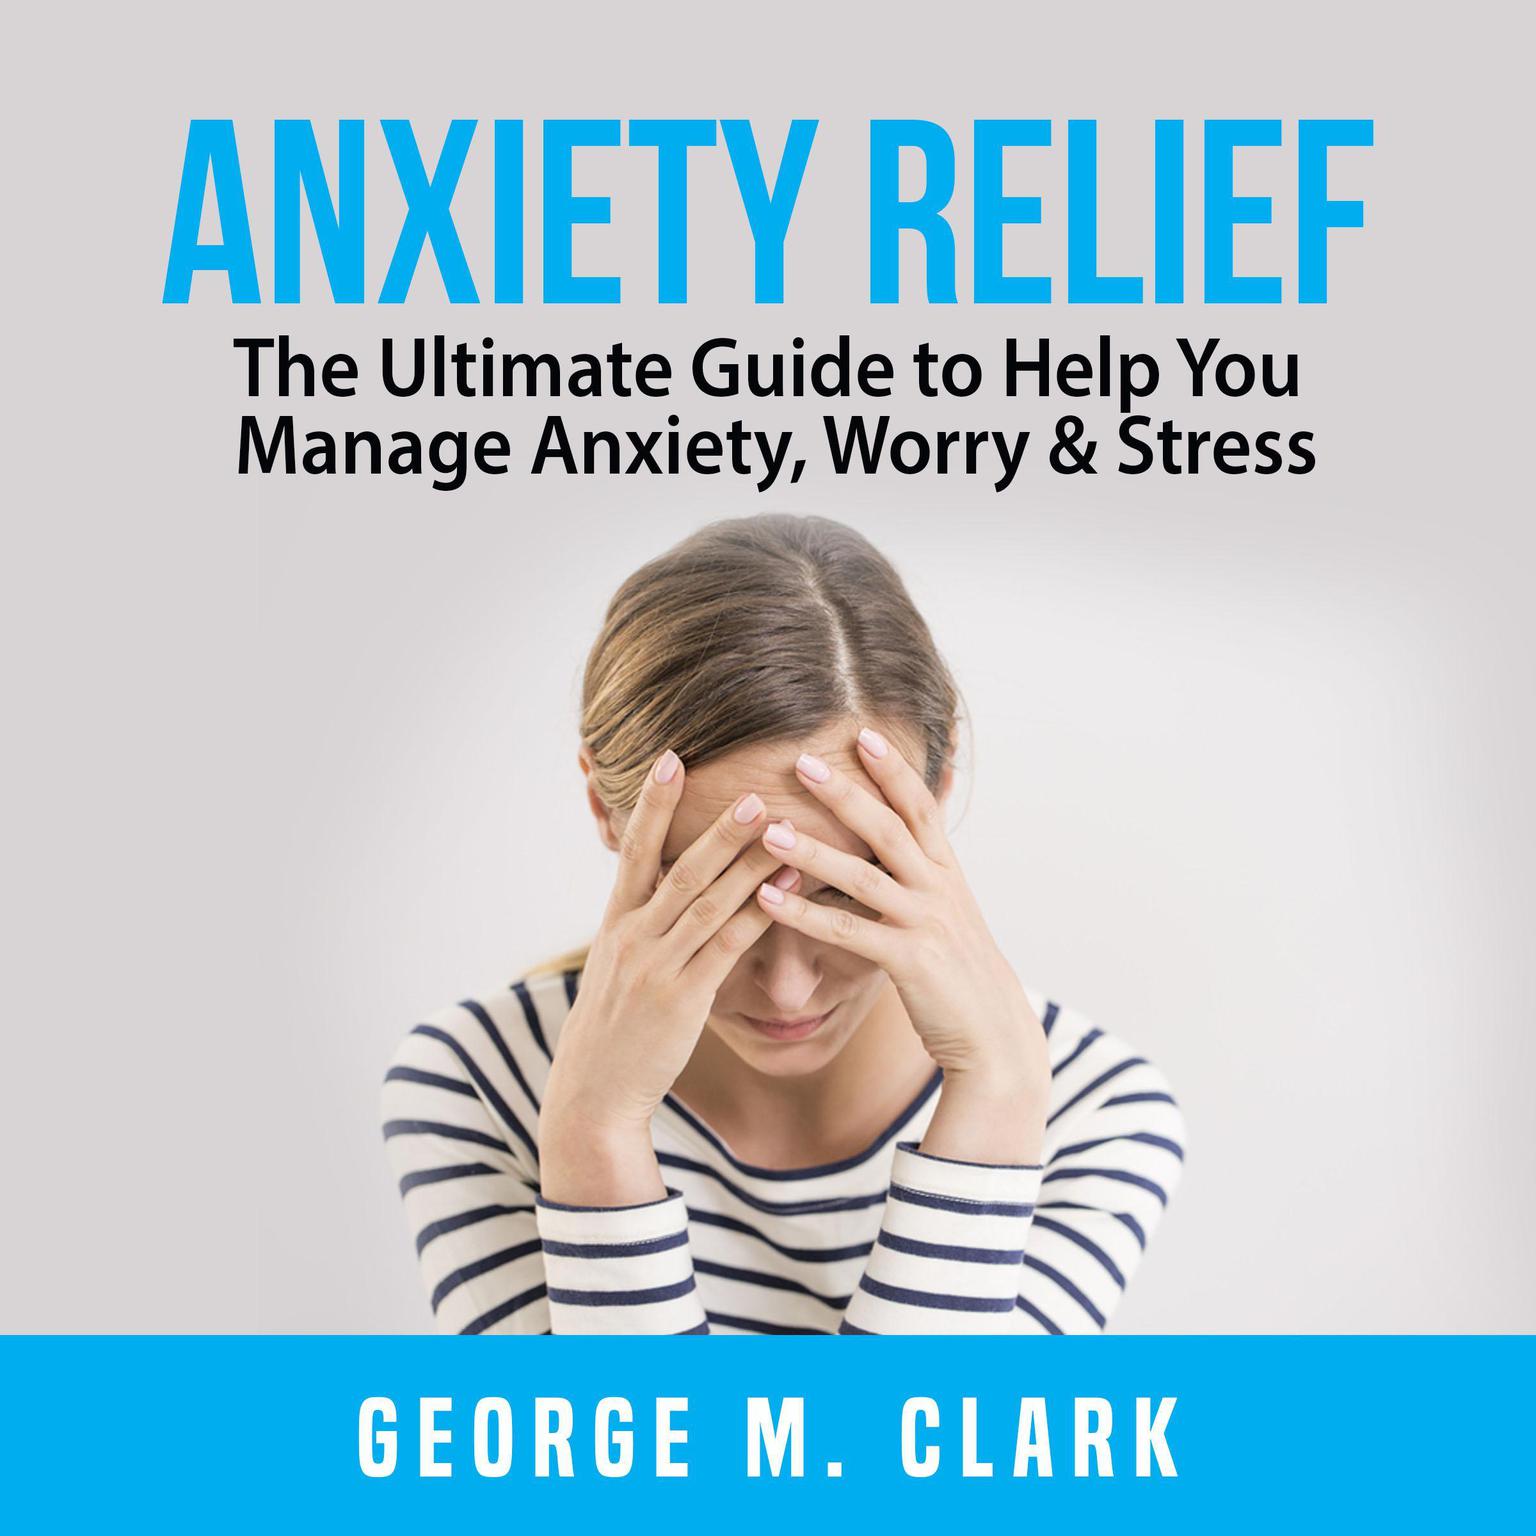 Anxiety Relief: The Ultimate Guide to Help You Manage Anxiety, Worry & Stress Audiobook, by George M. Clark